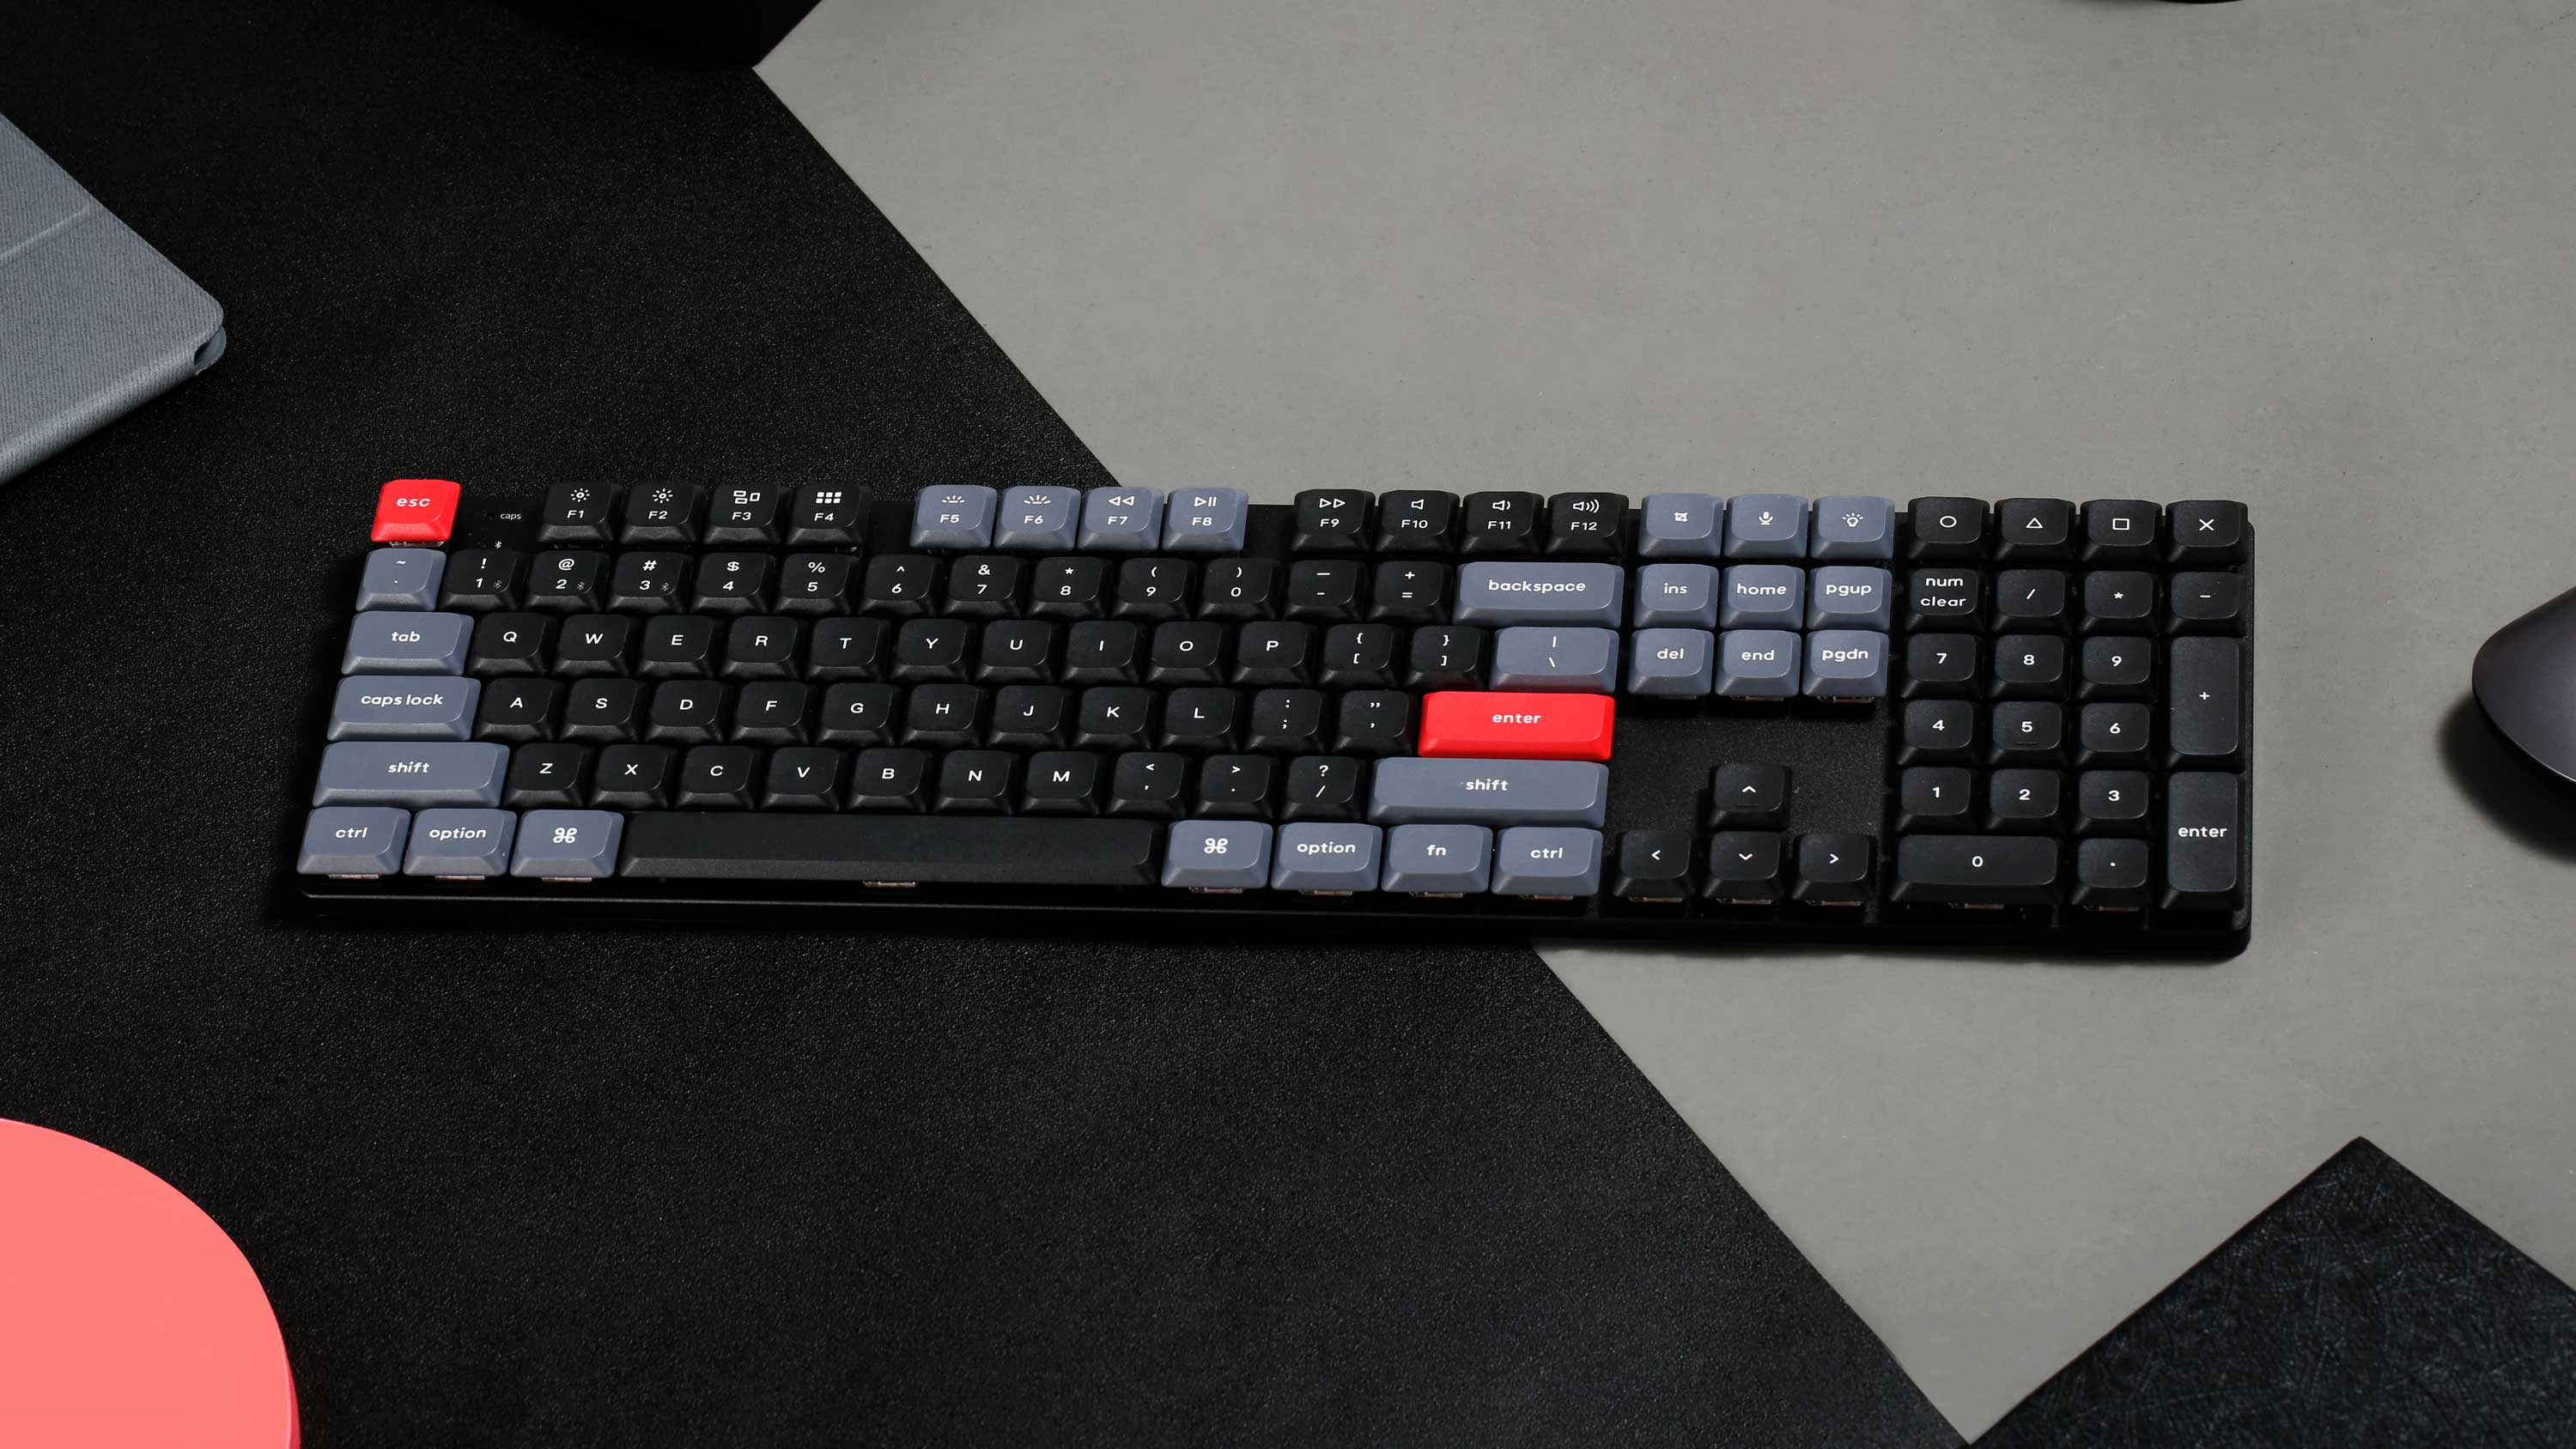 Keychron K5 Pro QMK/VIA Low-Profile Wireless Mechanical Keyboard with an ultra-slim body and hot-swappable